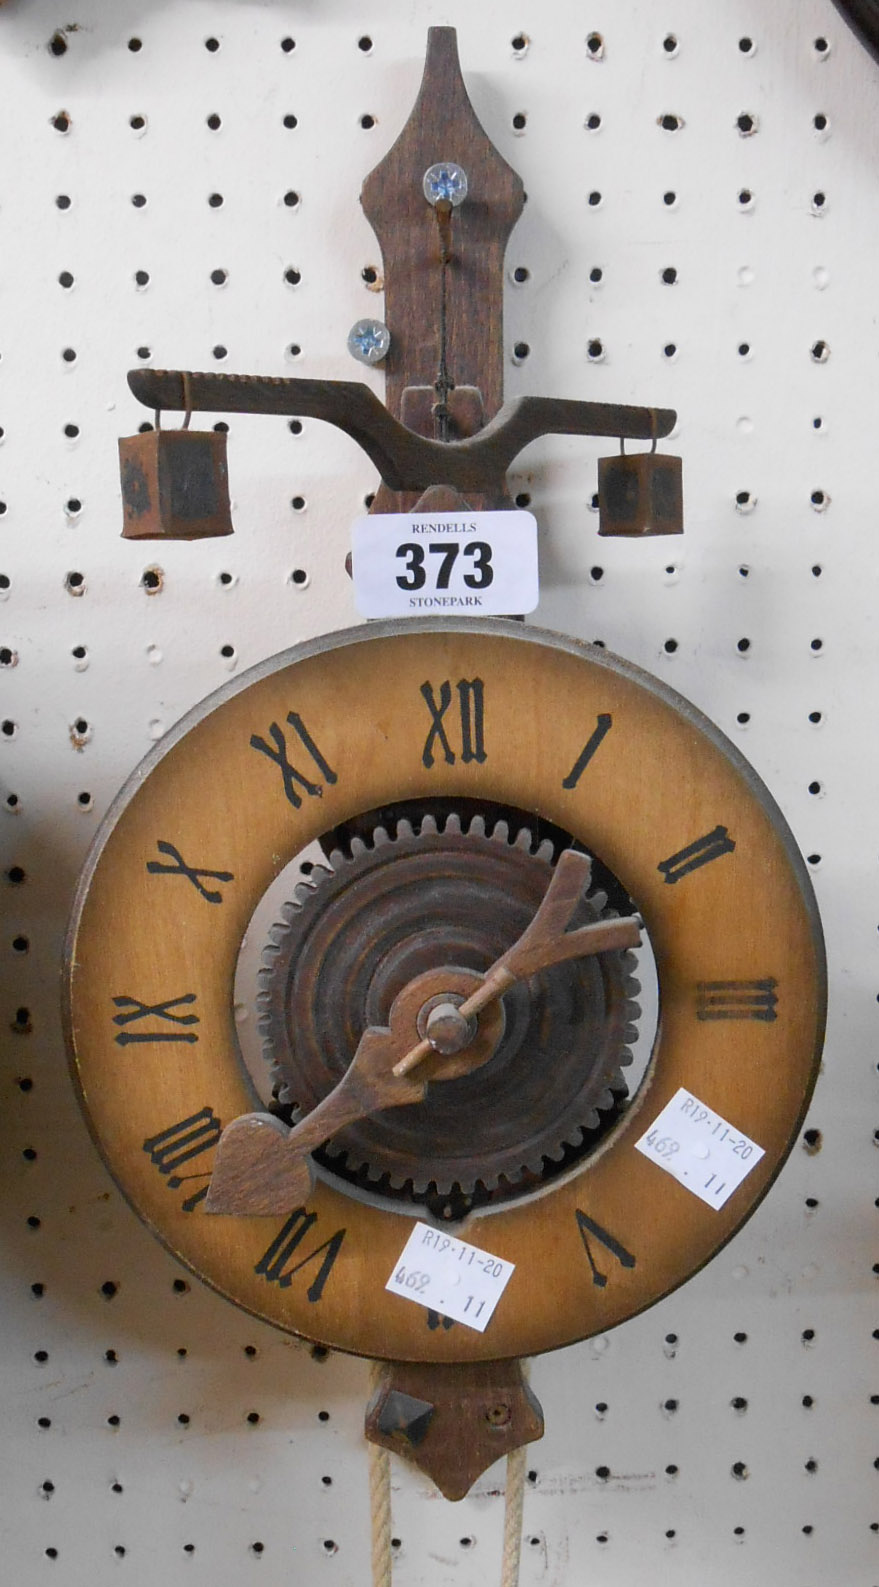 A reproduction of a wooden framed timepiece with stone and pumice weights